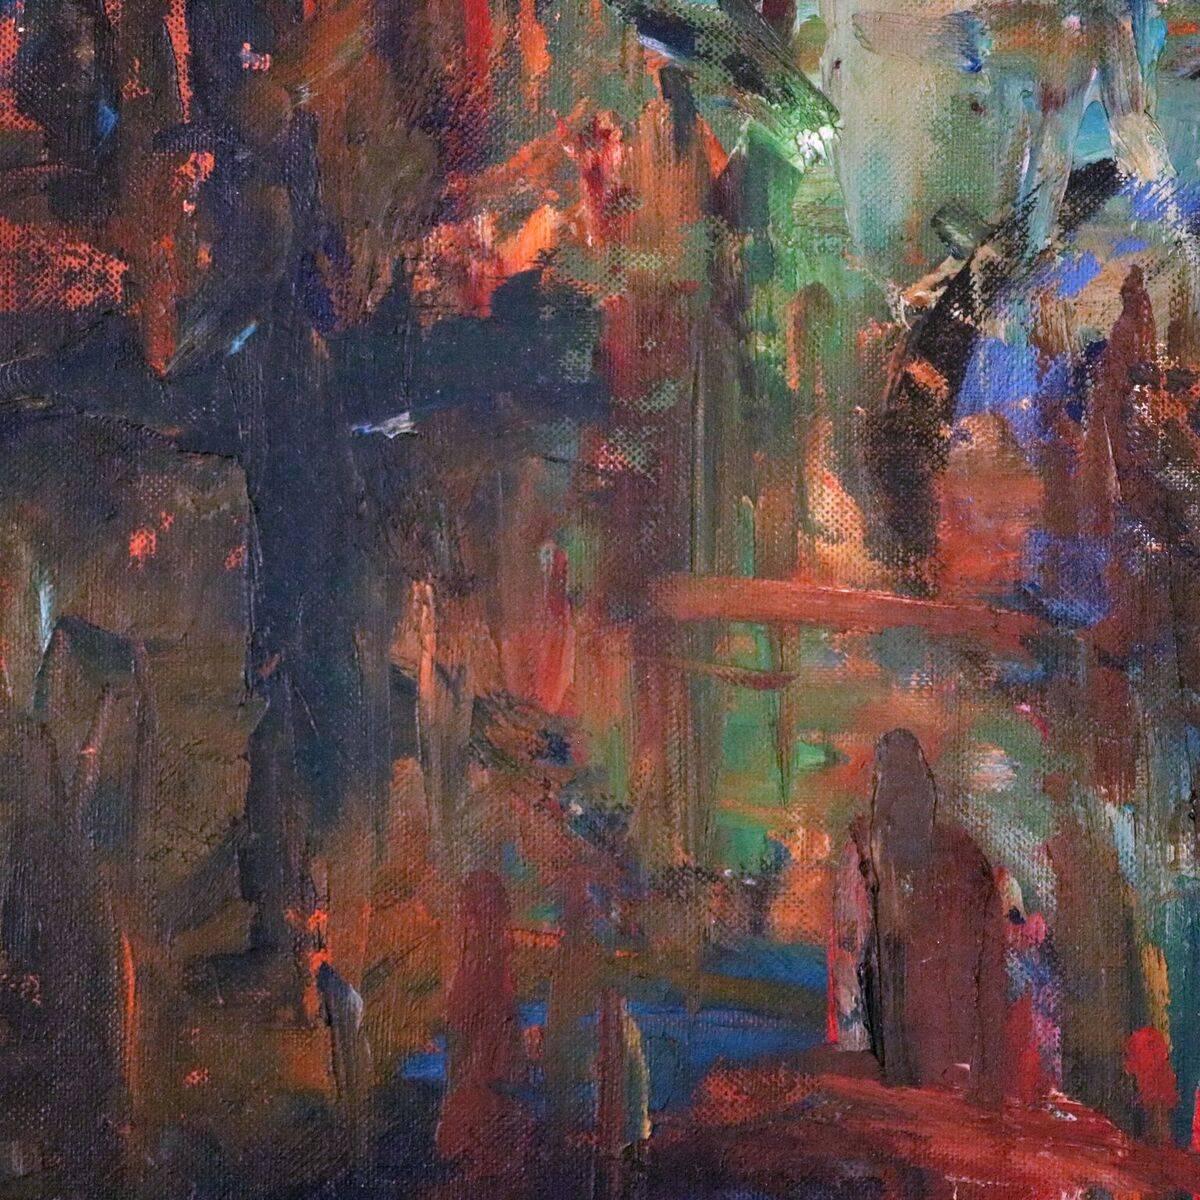 Mid-Century Modern abstract expressionism oil on canvas laid on board depicts city skyline scene, circa 1960.

Measures: 21.25" H x 25.25" W x .5" D framed; 19.25" H x 23.25" W sight.